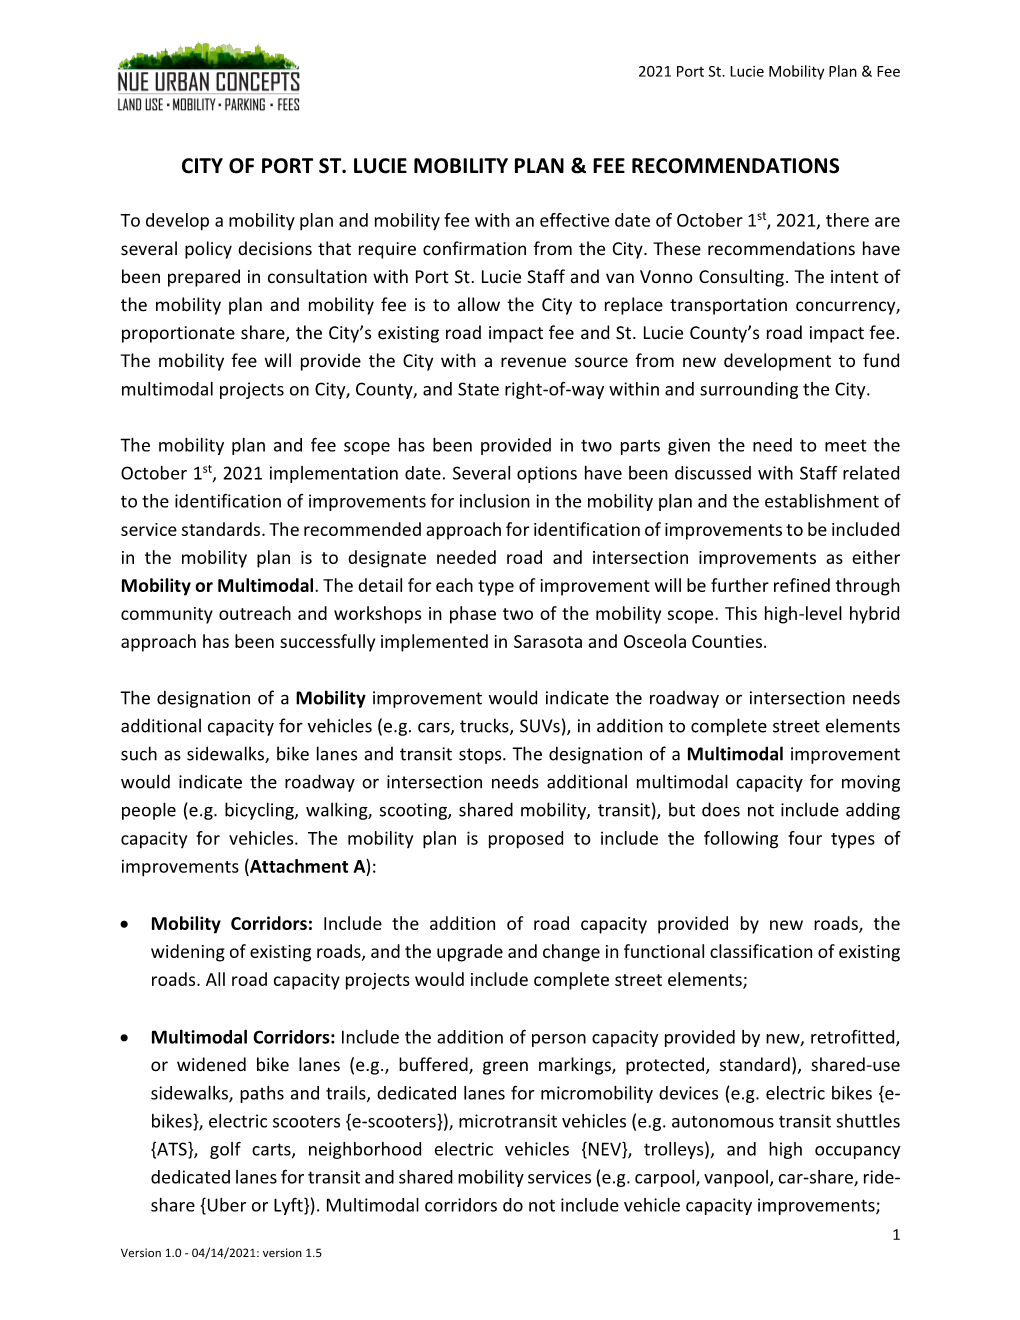 City of Port St. Lucie Mobility Plan & Fee Recommendations